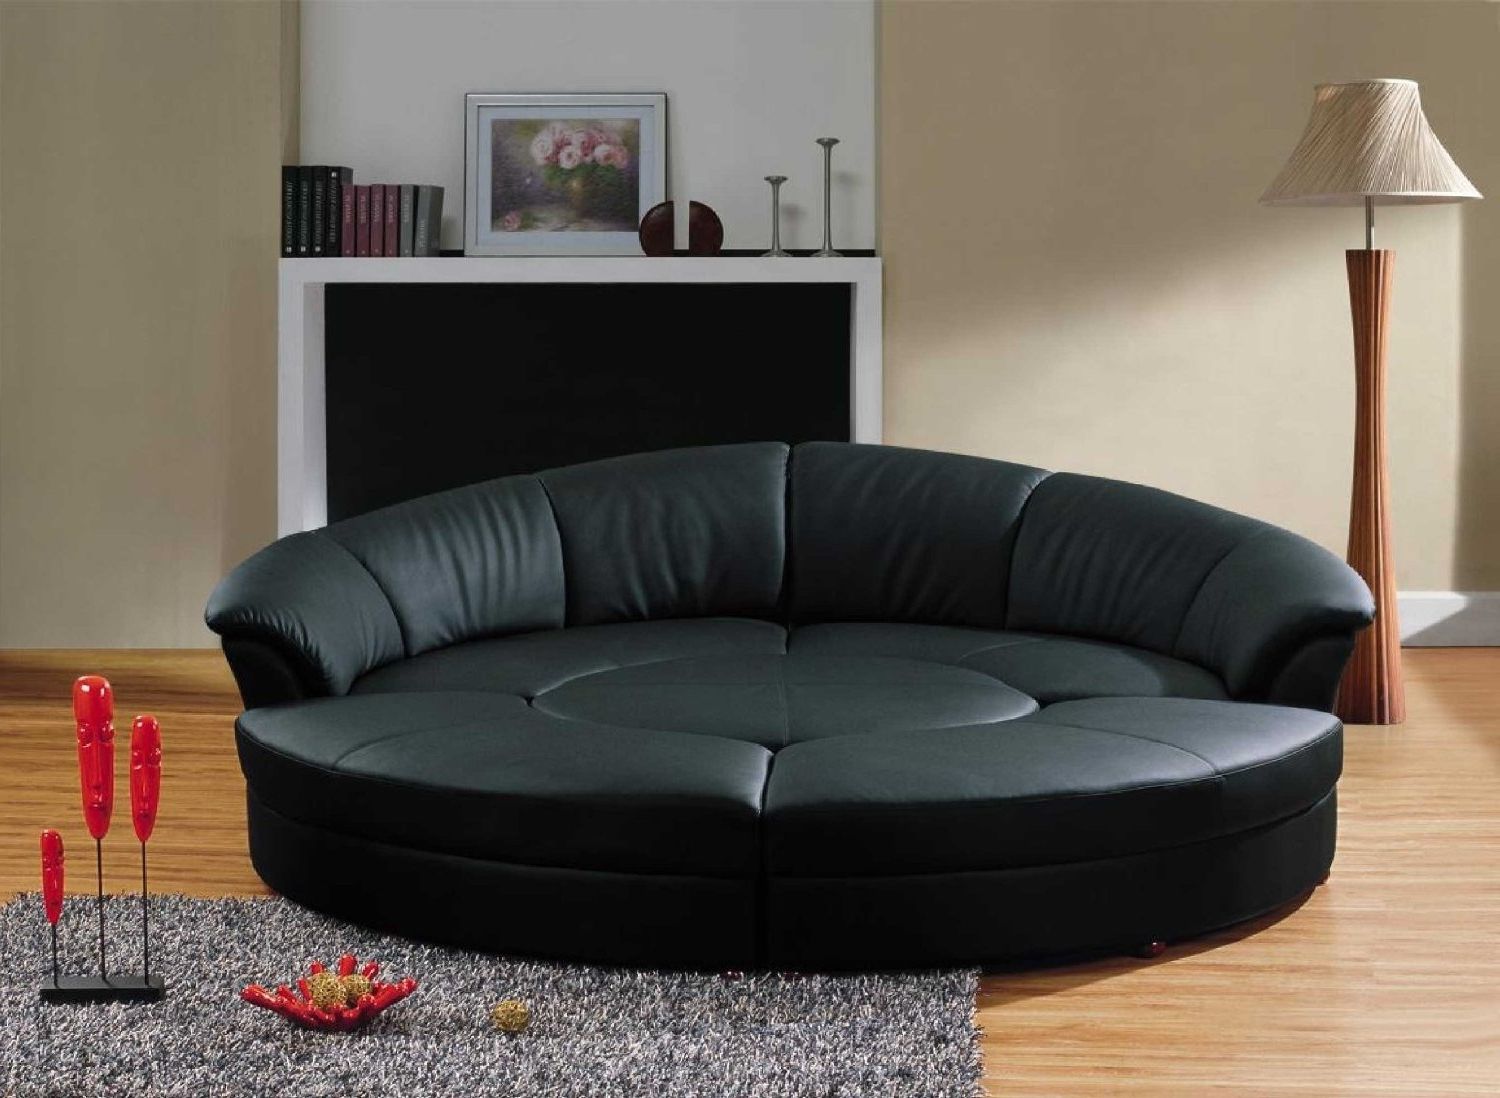 Well Known Big Round Sofa Chairs With Sofa : Round Sofa Chair Leon's Small Round Sofa Chair Round Sofa (View 2 of 15)